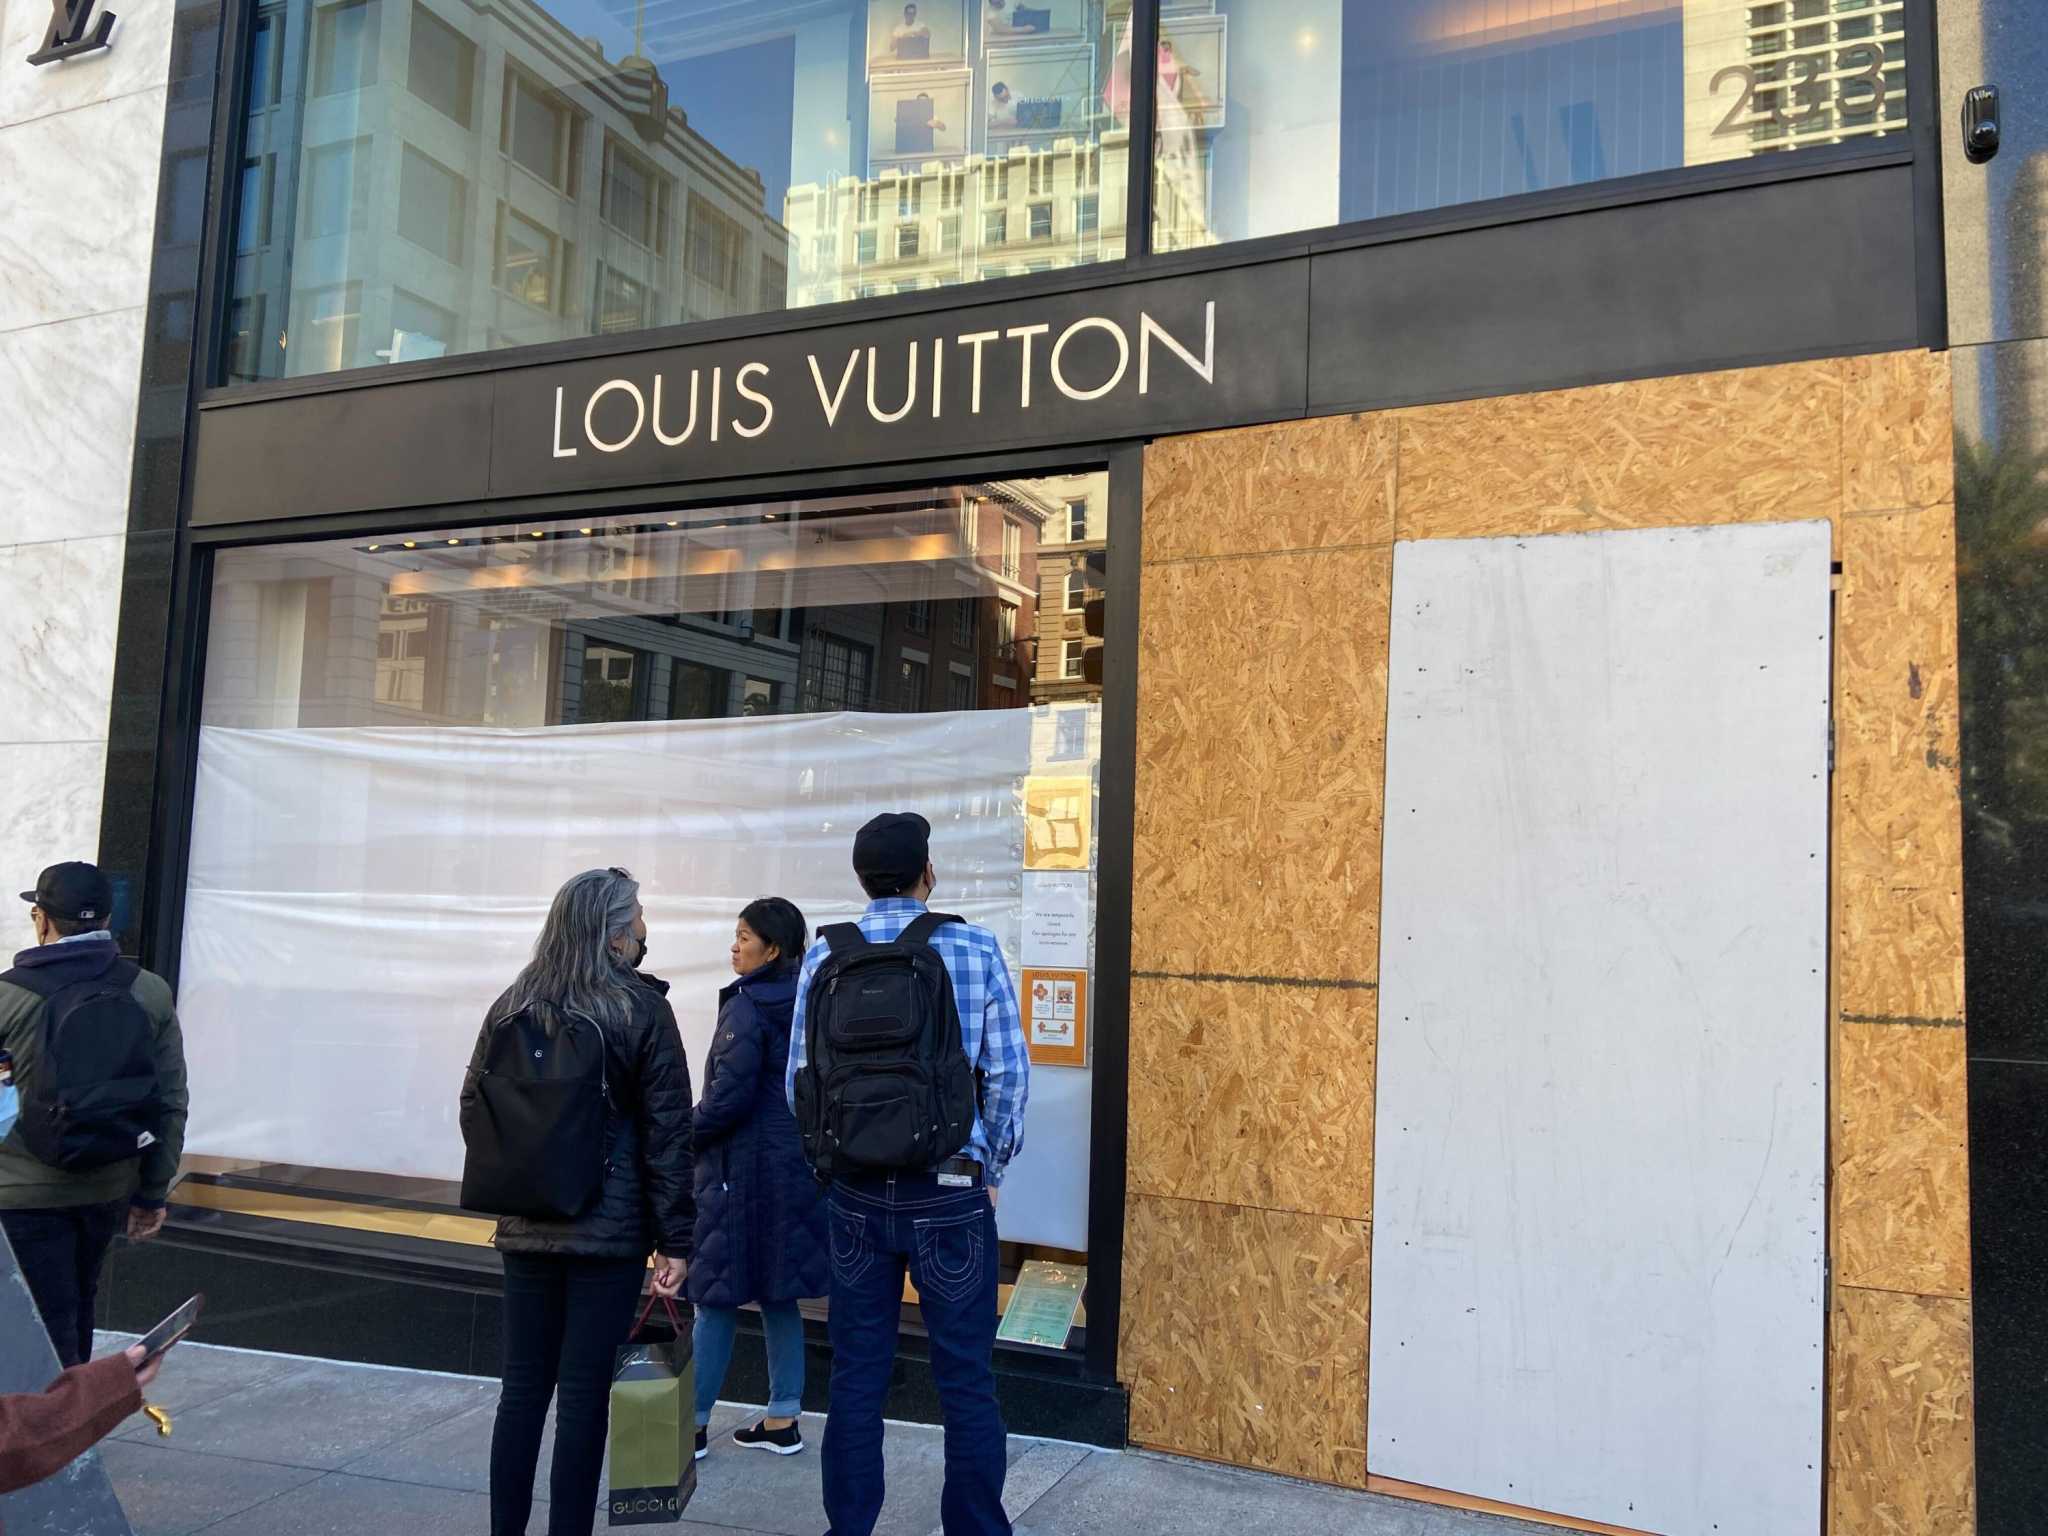 Looters Strike Stores in Downtown S.F. and Emeryville Shopping